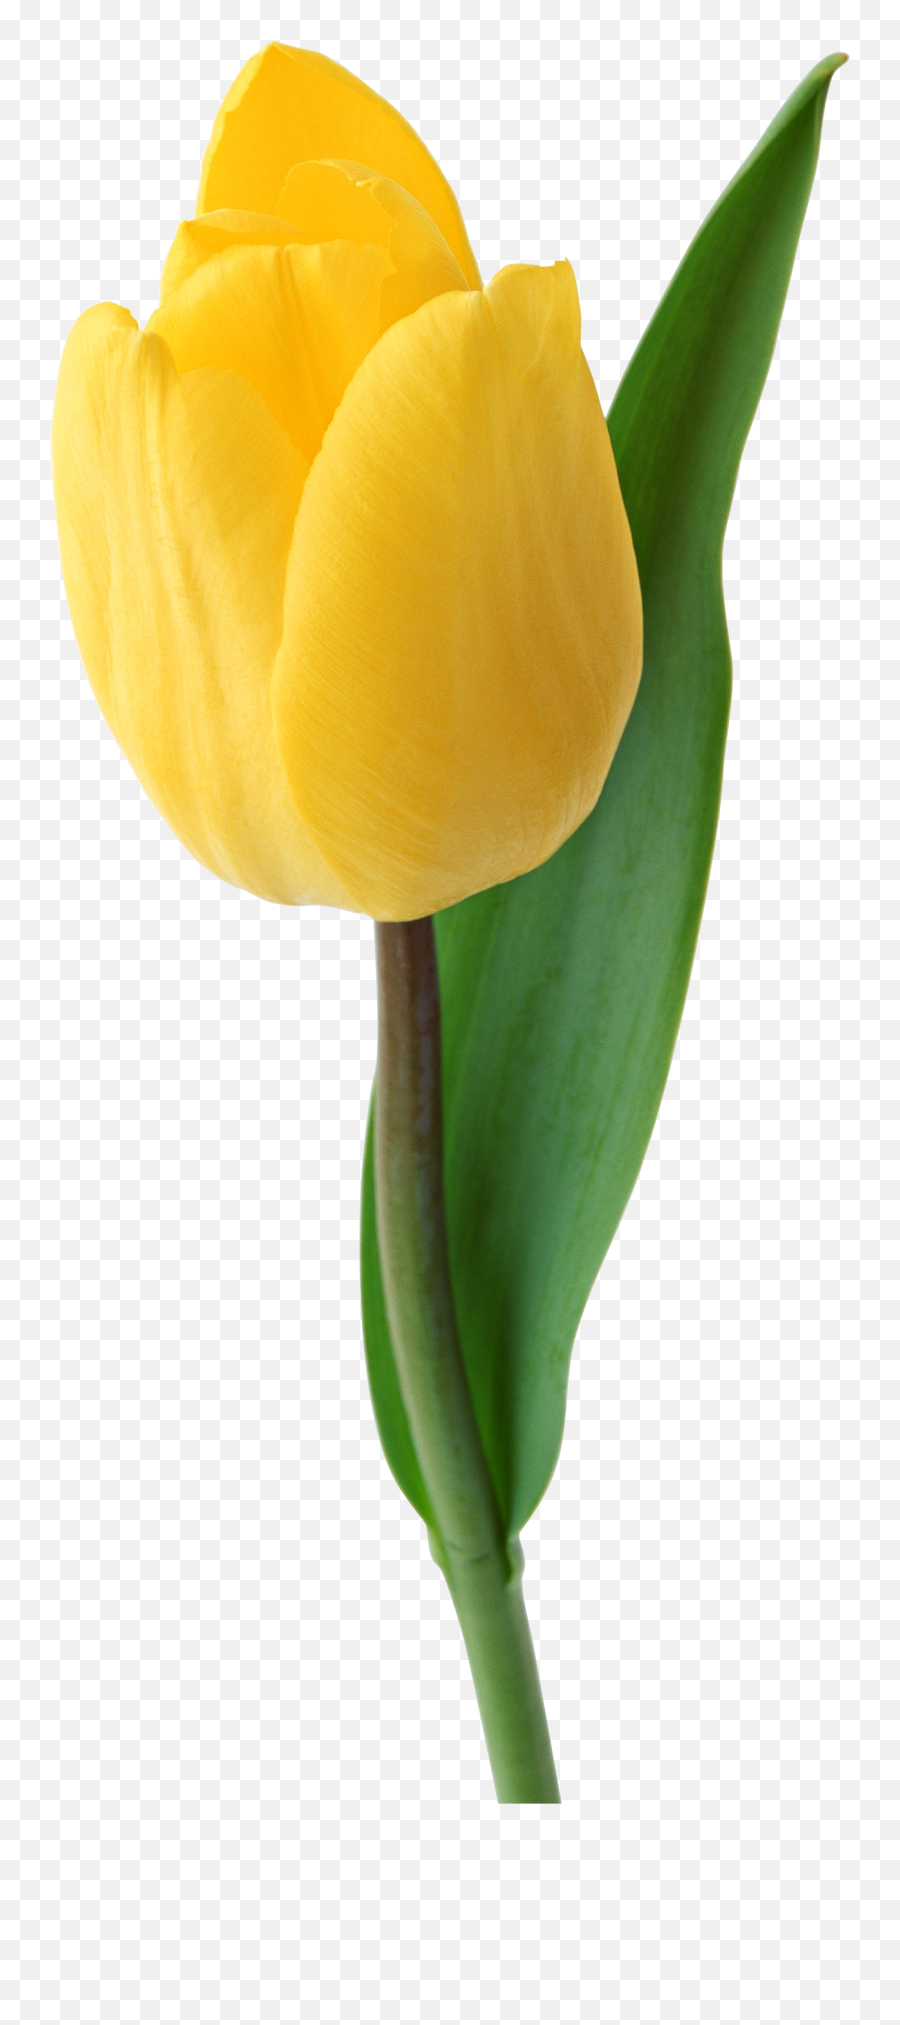 Download Tulip Png Image For Free - Portable Network Graphics,Tulip Transparent